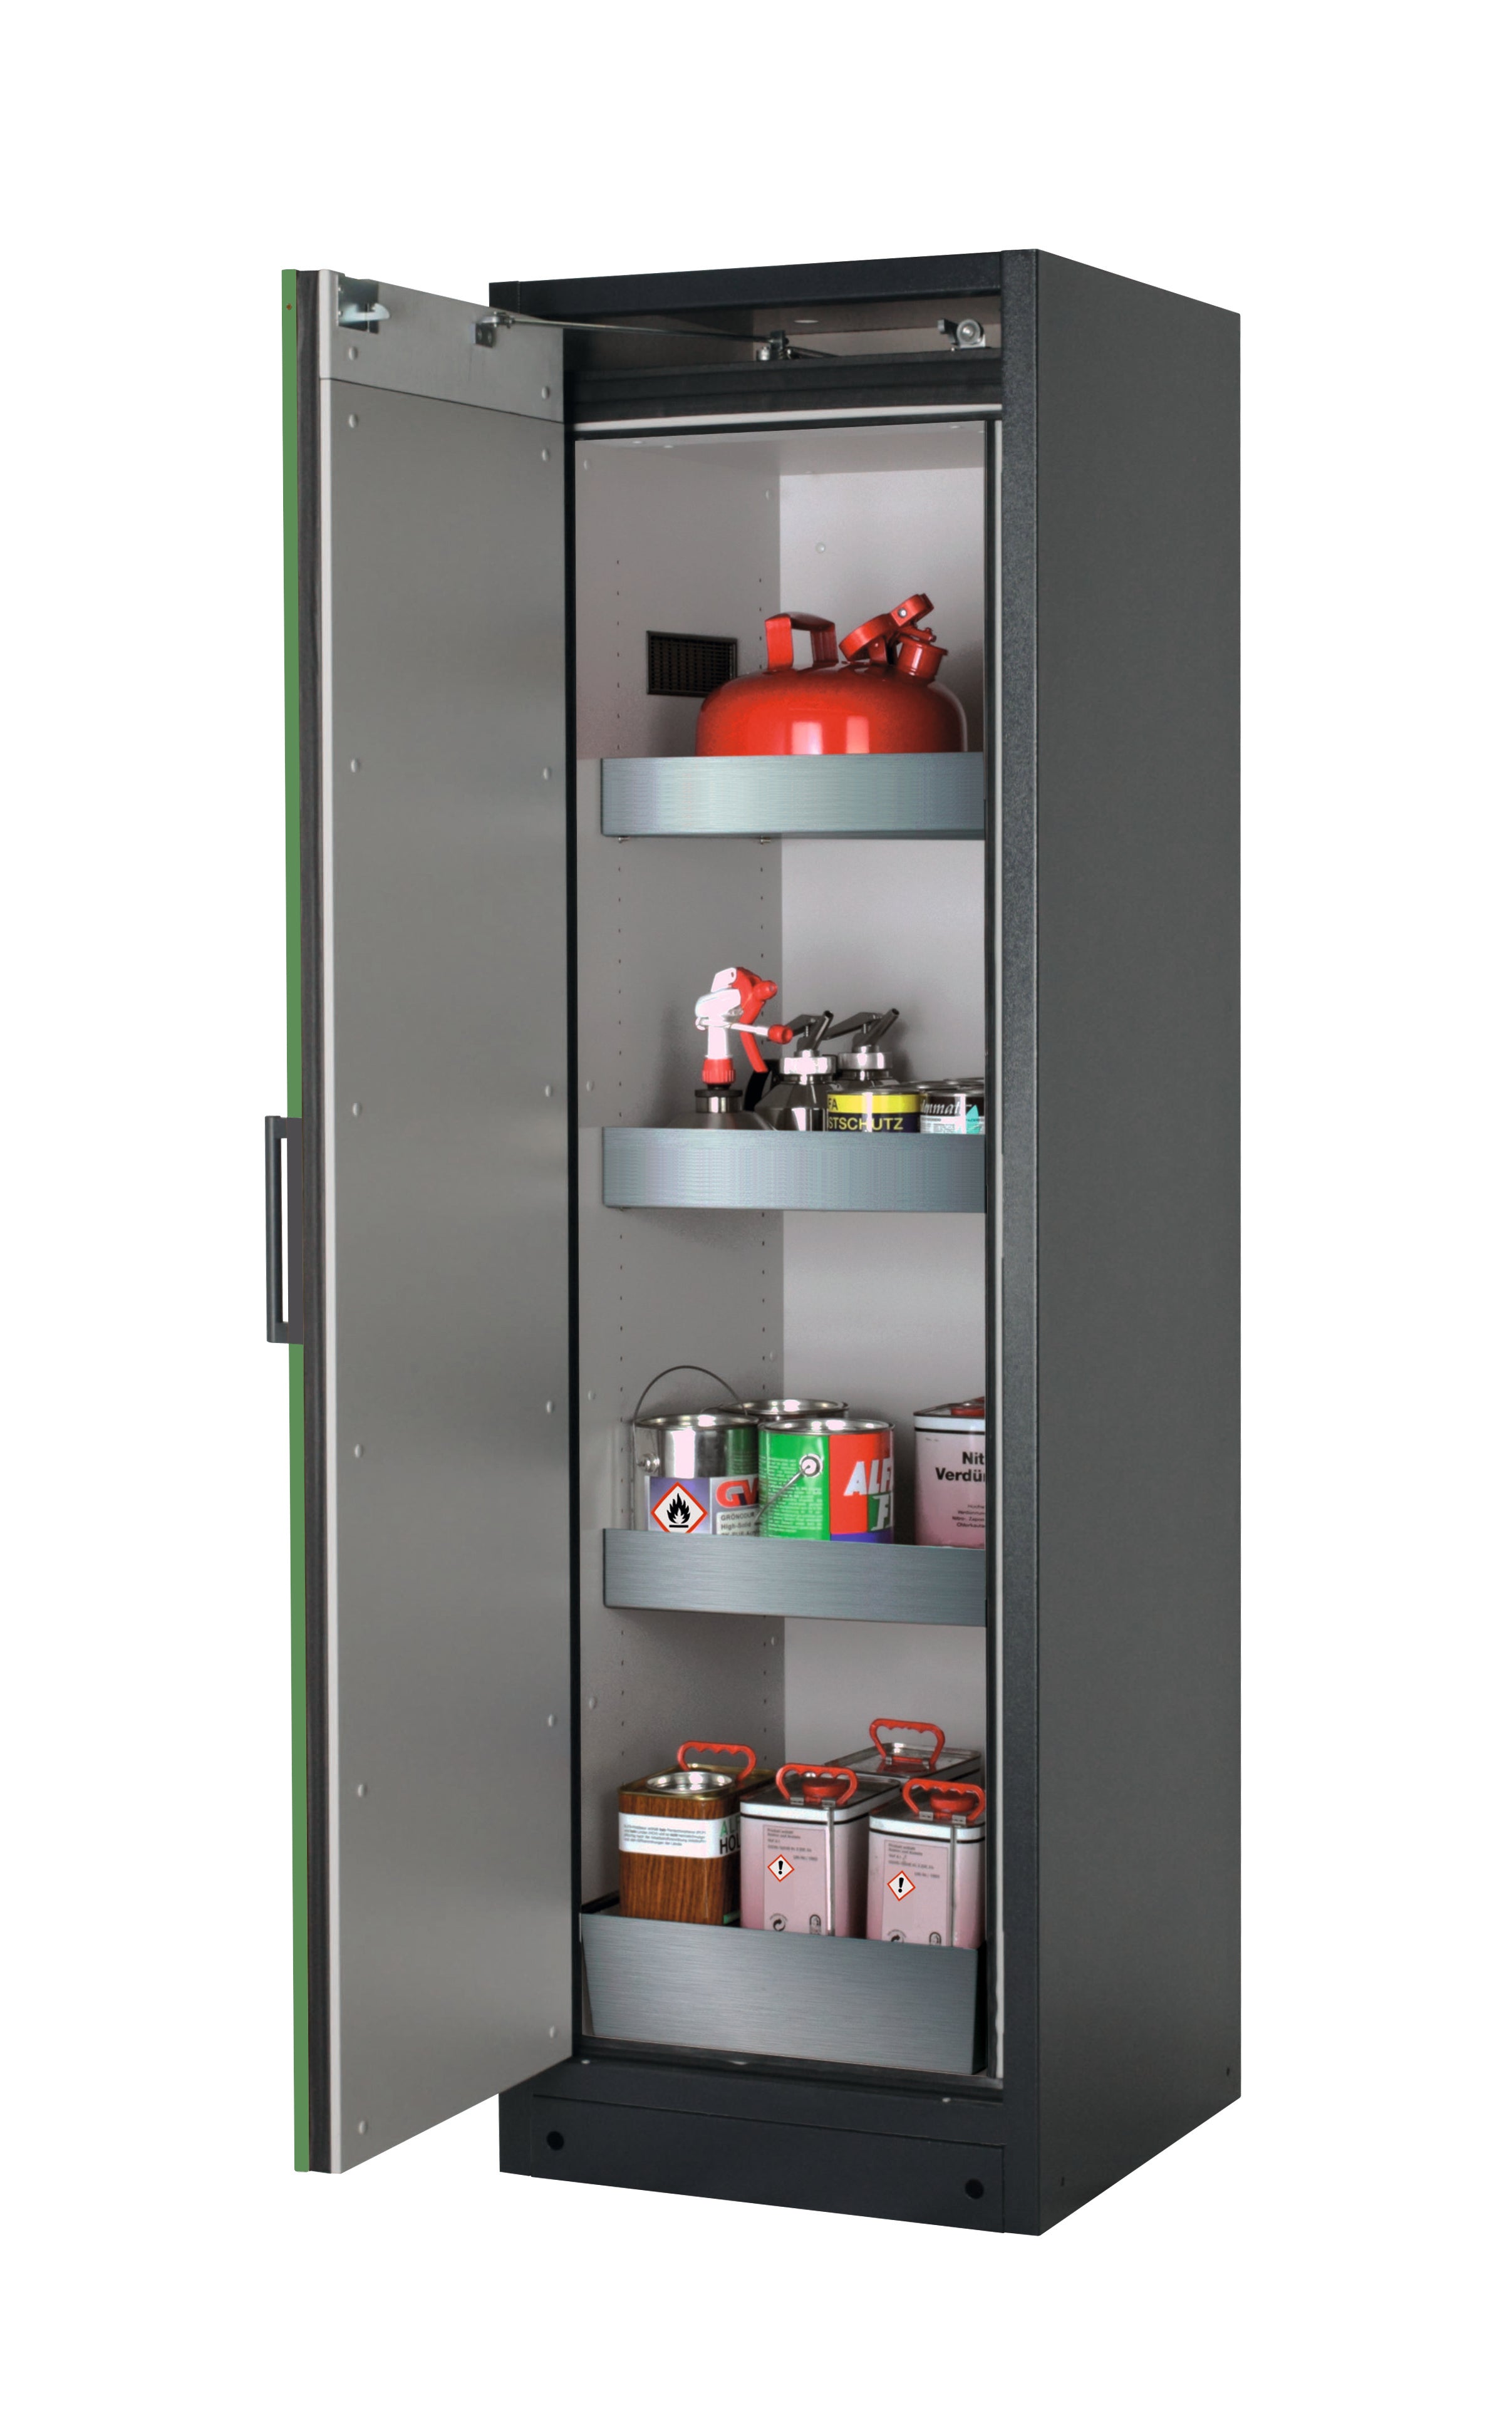 Type 90 safety storage cabinet Q-CLASSIC-90 model Q90.195.060 in reseda green RAL 6011 with 3x tray shelf (standard) (stainless steel 1.4301),